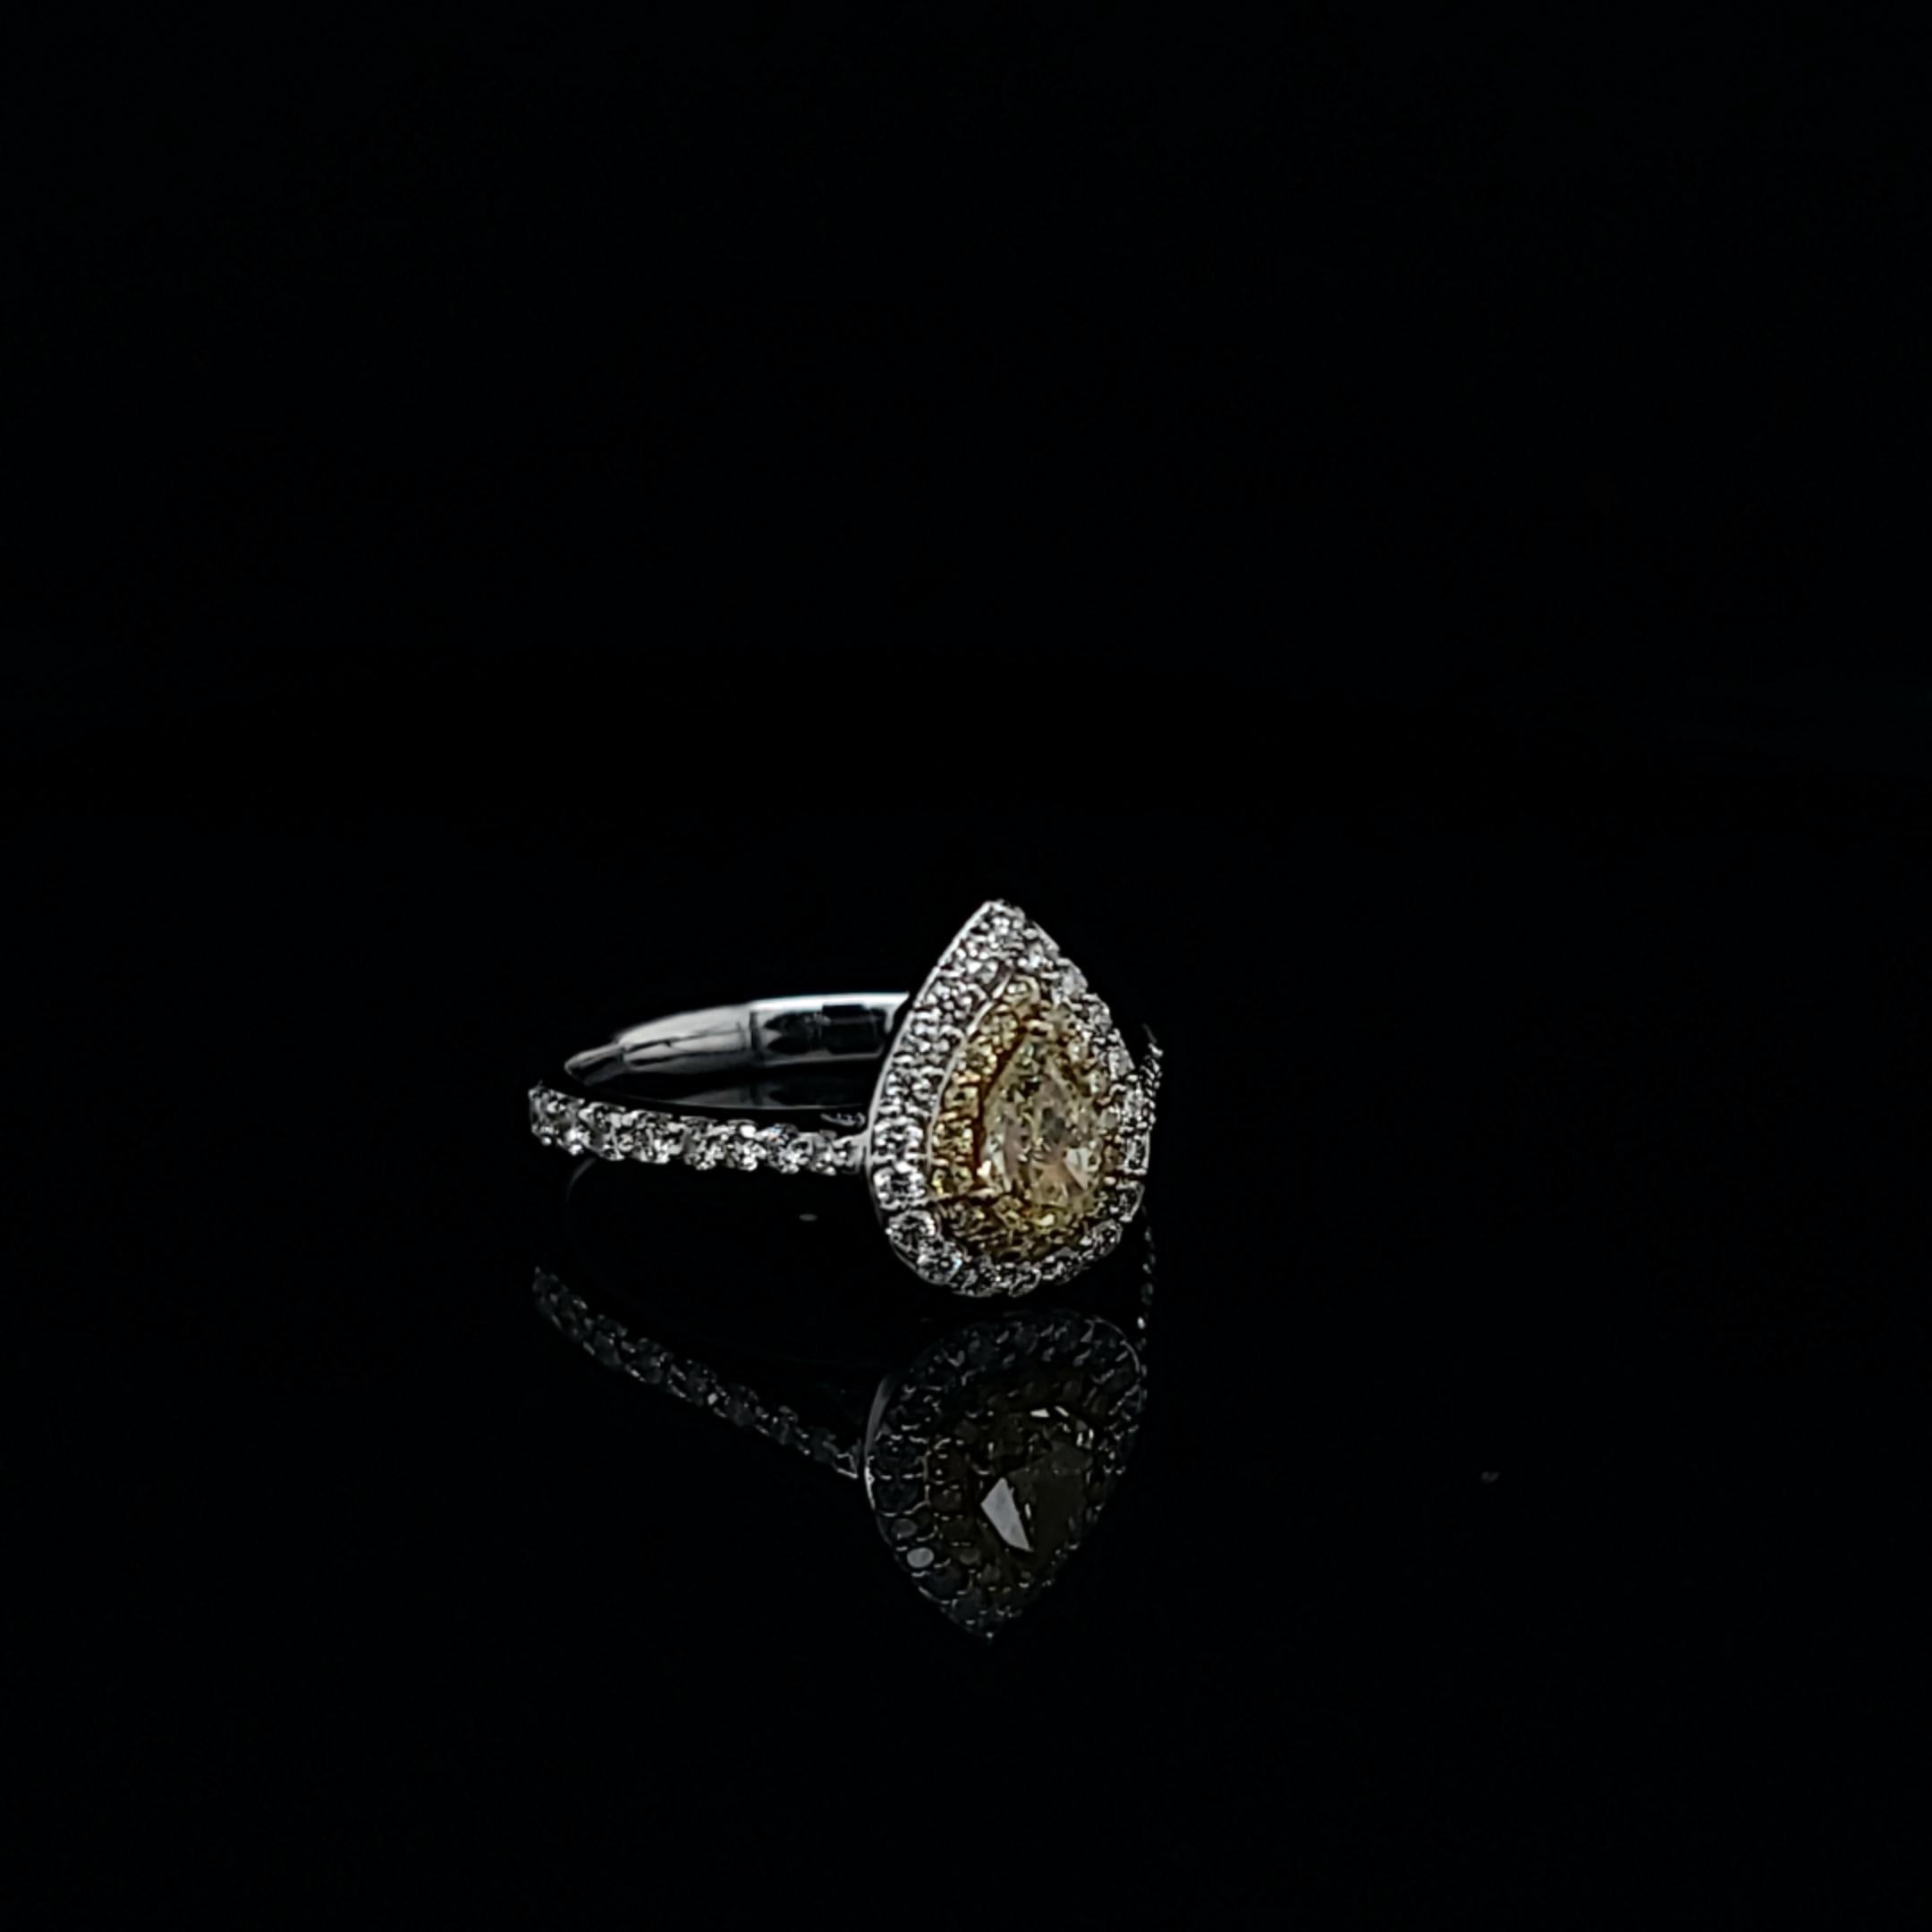 Yellow Pear Shape ring featuring a 0.43 fancy yellow diamonds. Accented by 16-0.09ctw yellow melee and 36-0.41ctw of white melee. Set in 18k white gold, size 6.5. Delivers LARGE look. Mounting that features double pave halo around center stone makes